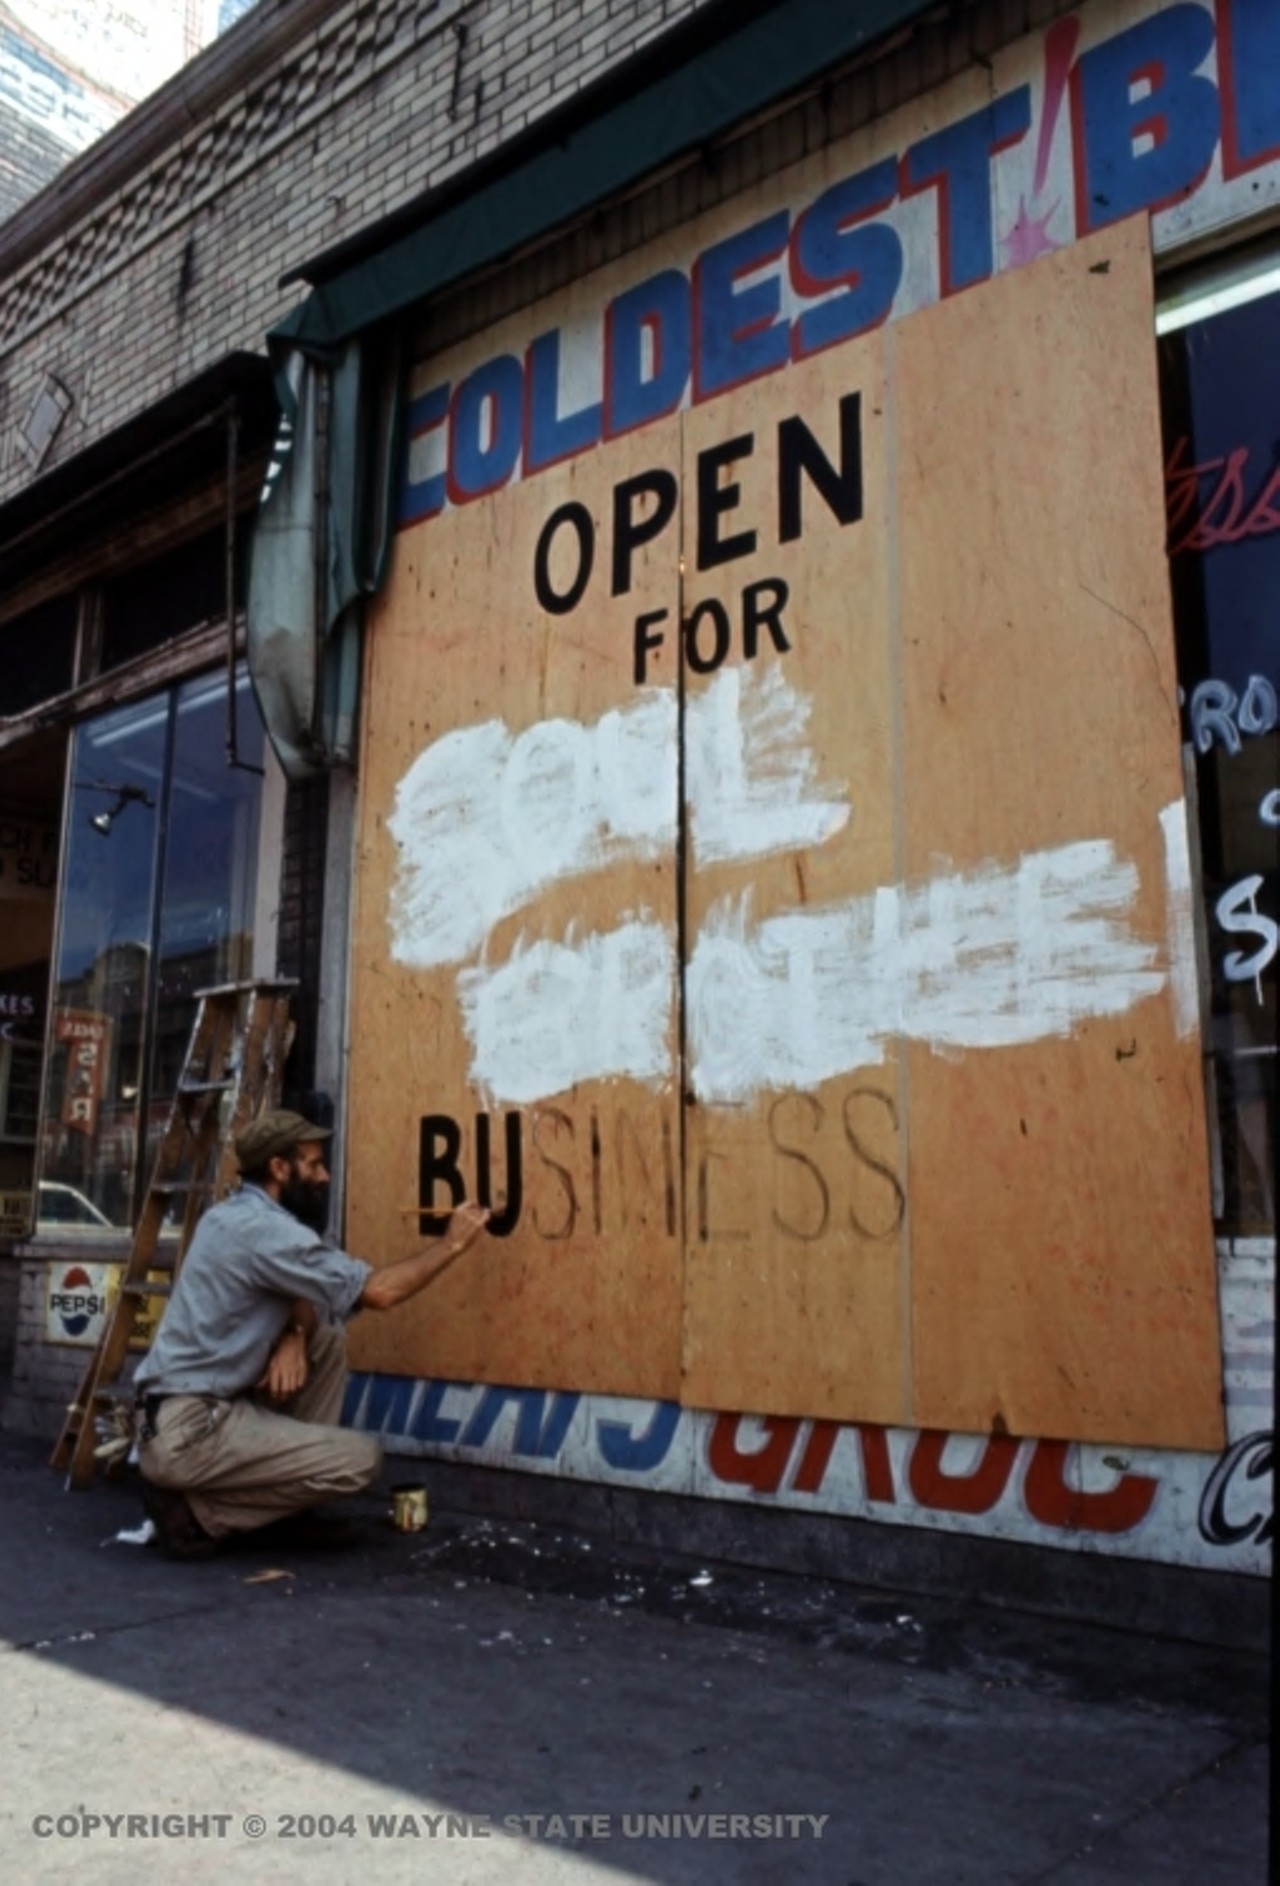 After the riots, businesses left standing continued on despite damage to their buildings and neighborhoods.